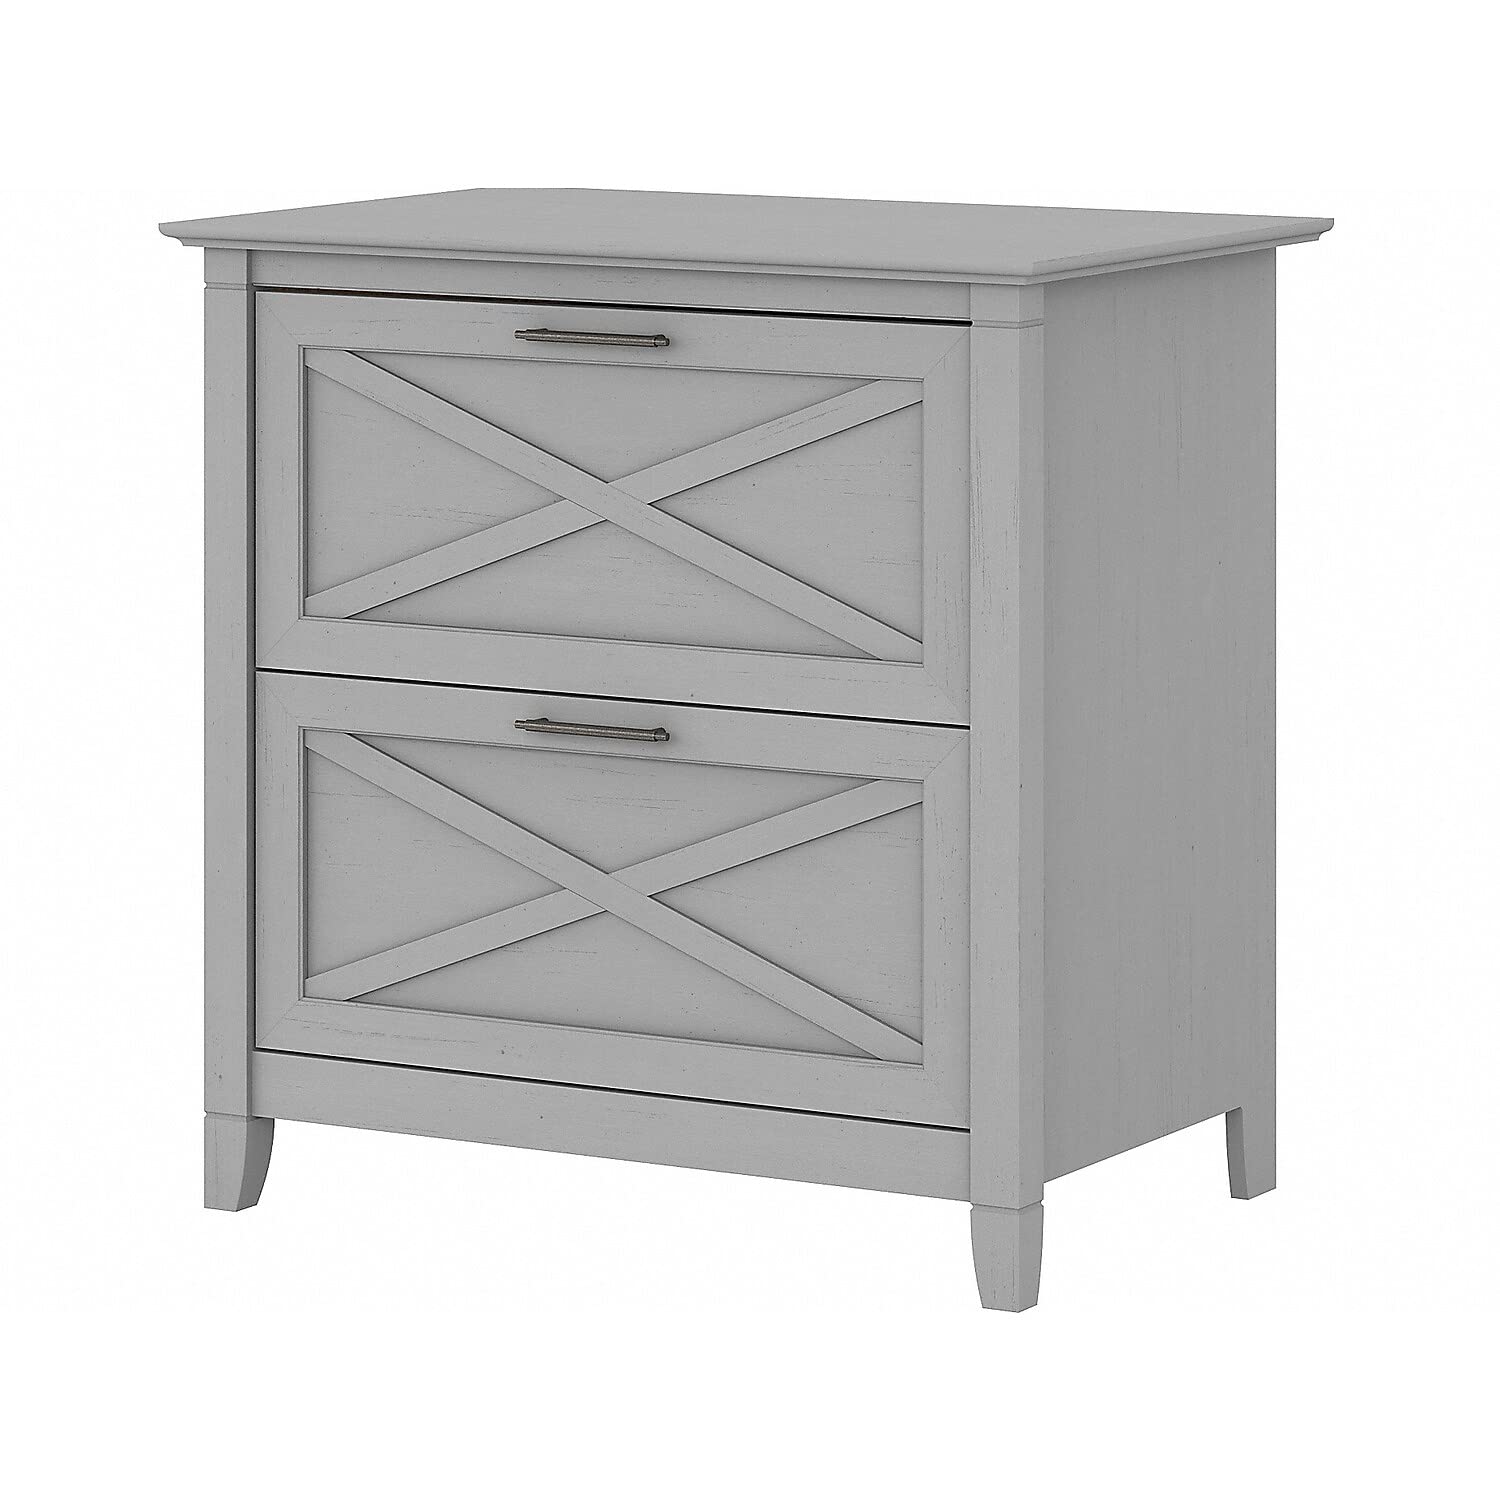 Bush Furniture Key West 2 Drawer Lateral File Cabinet, Cape Cod Gray